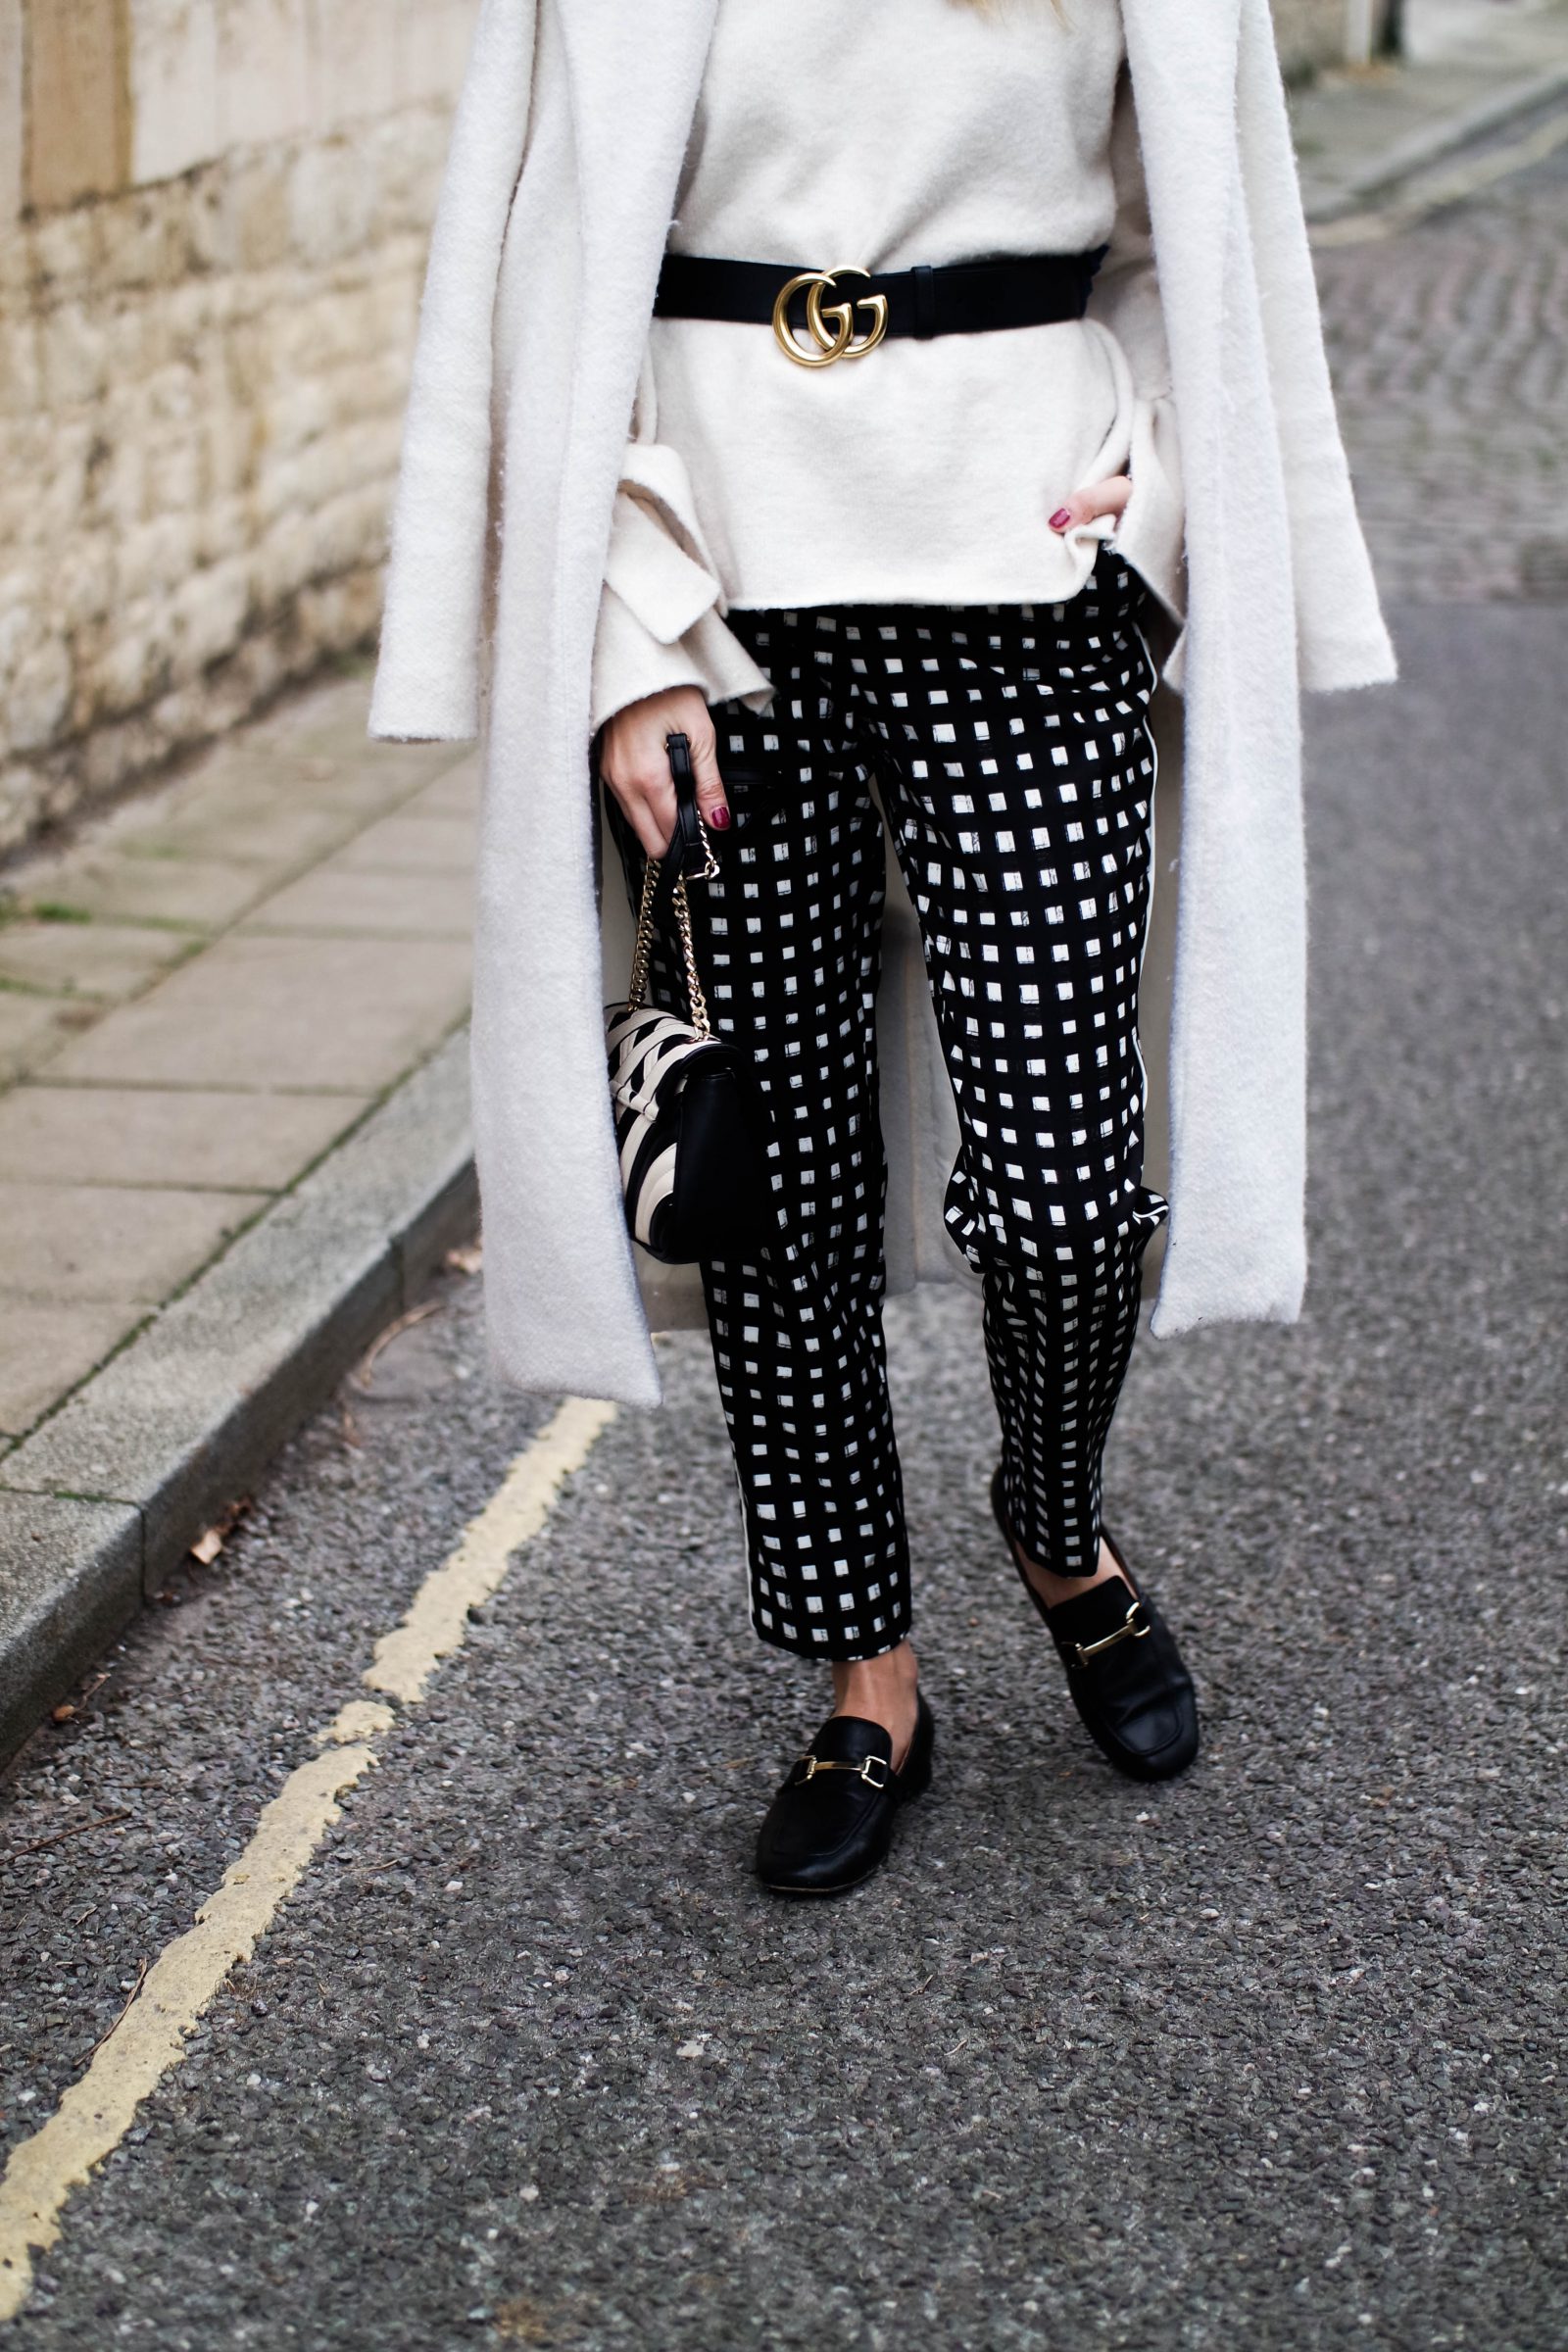 Printed Trousers Trying Something New - Monochrome